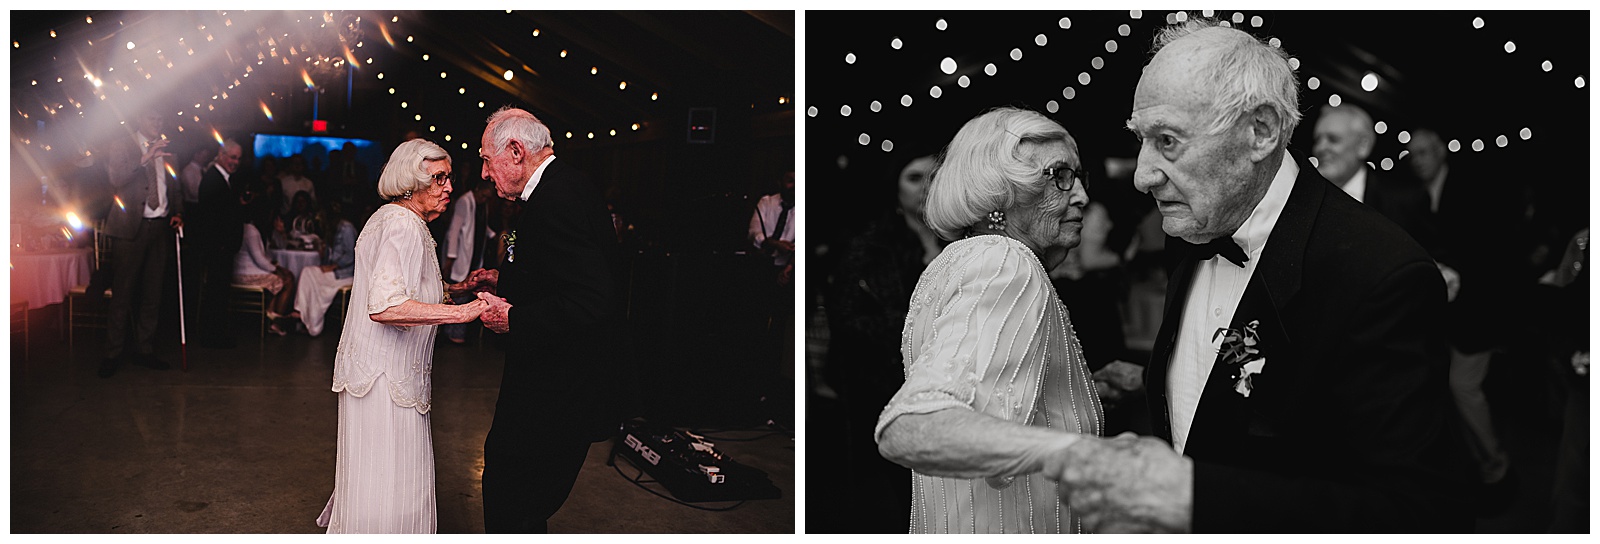 The oldest couple dancing at the reception. 